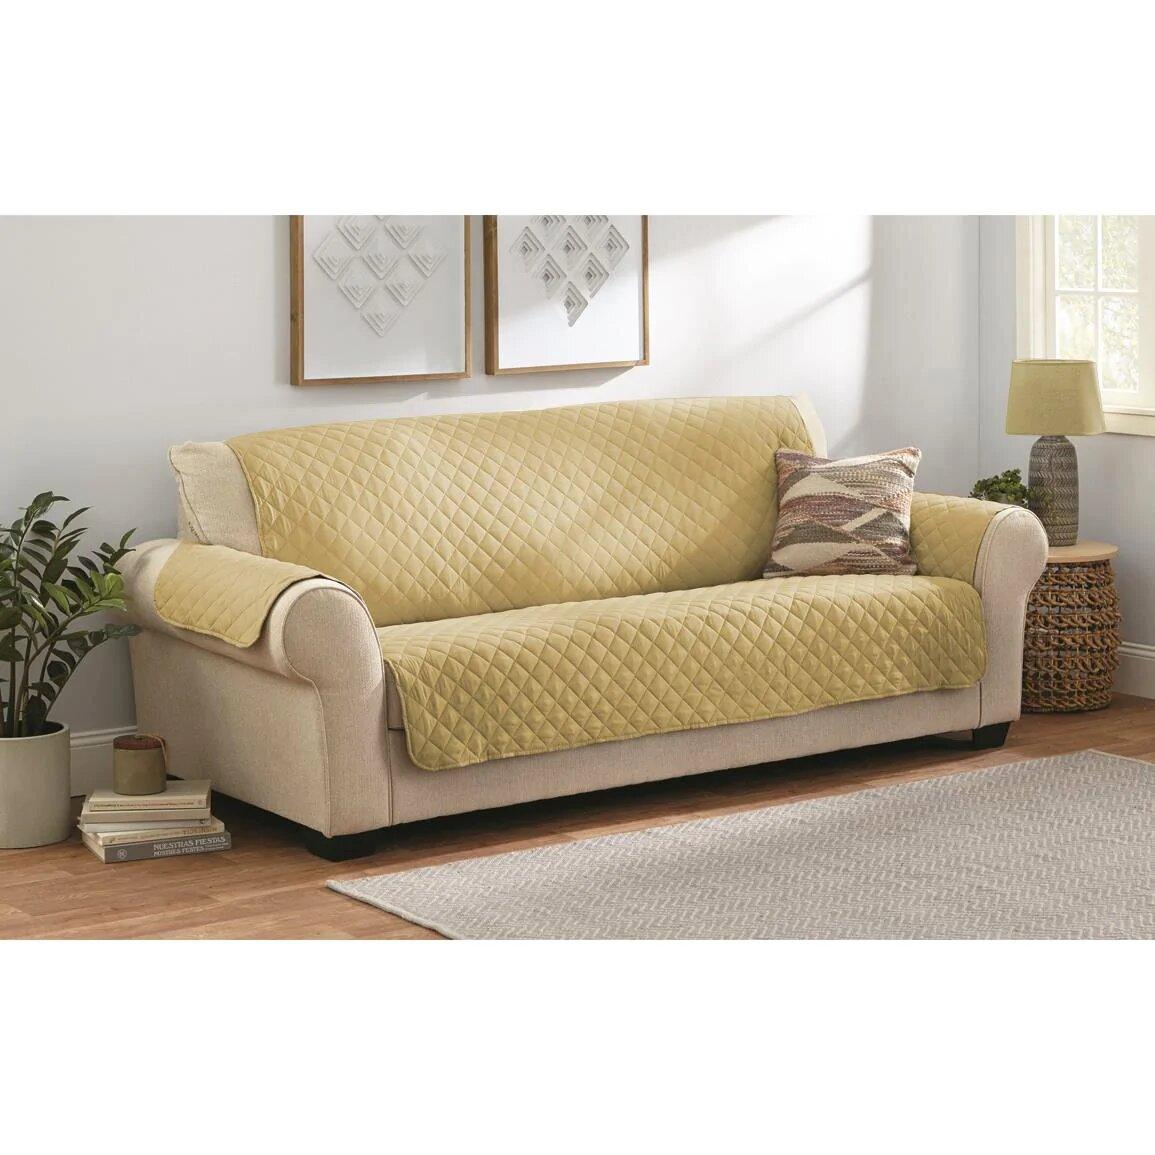 Quilted Sofa covers Non-slip W/Piping Beige (001) - 92Bedding